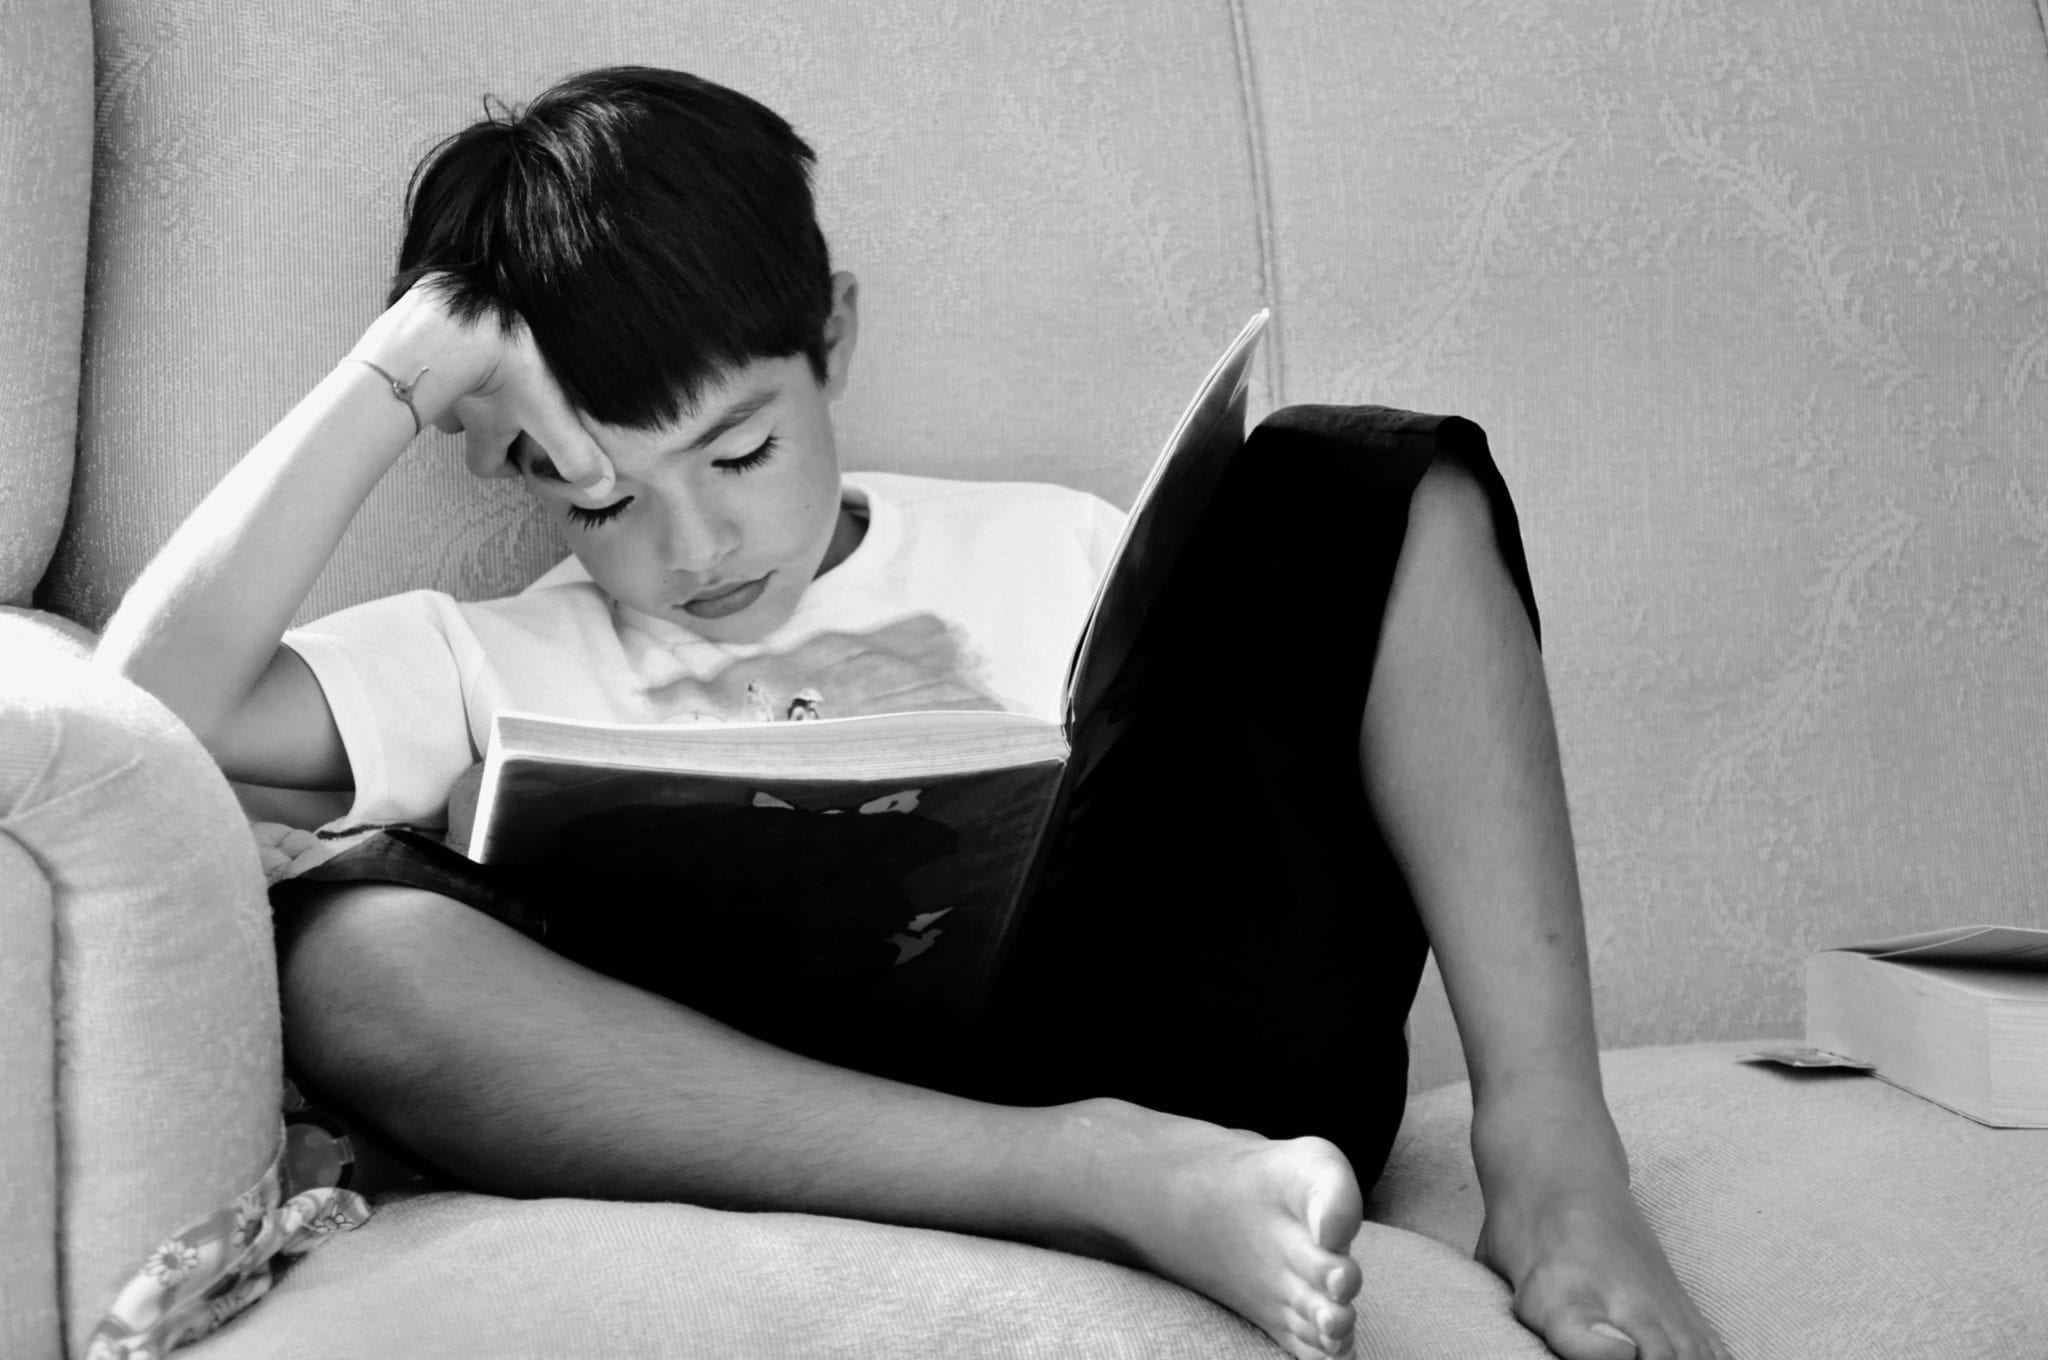 black and white image of a boy reading a book casually on the couch